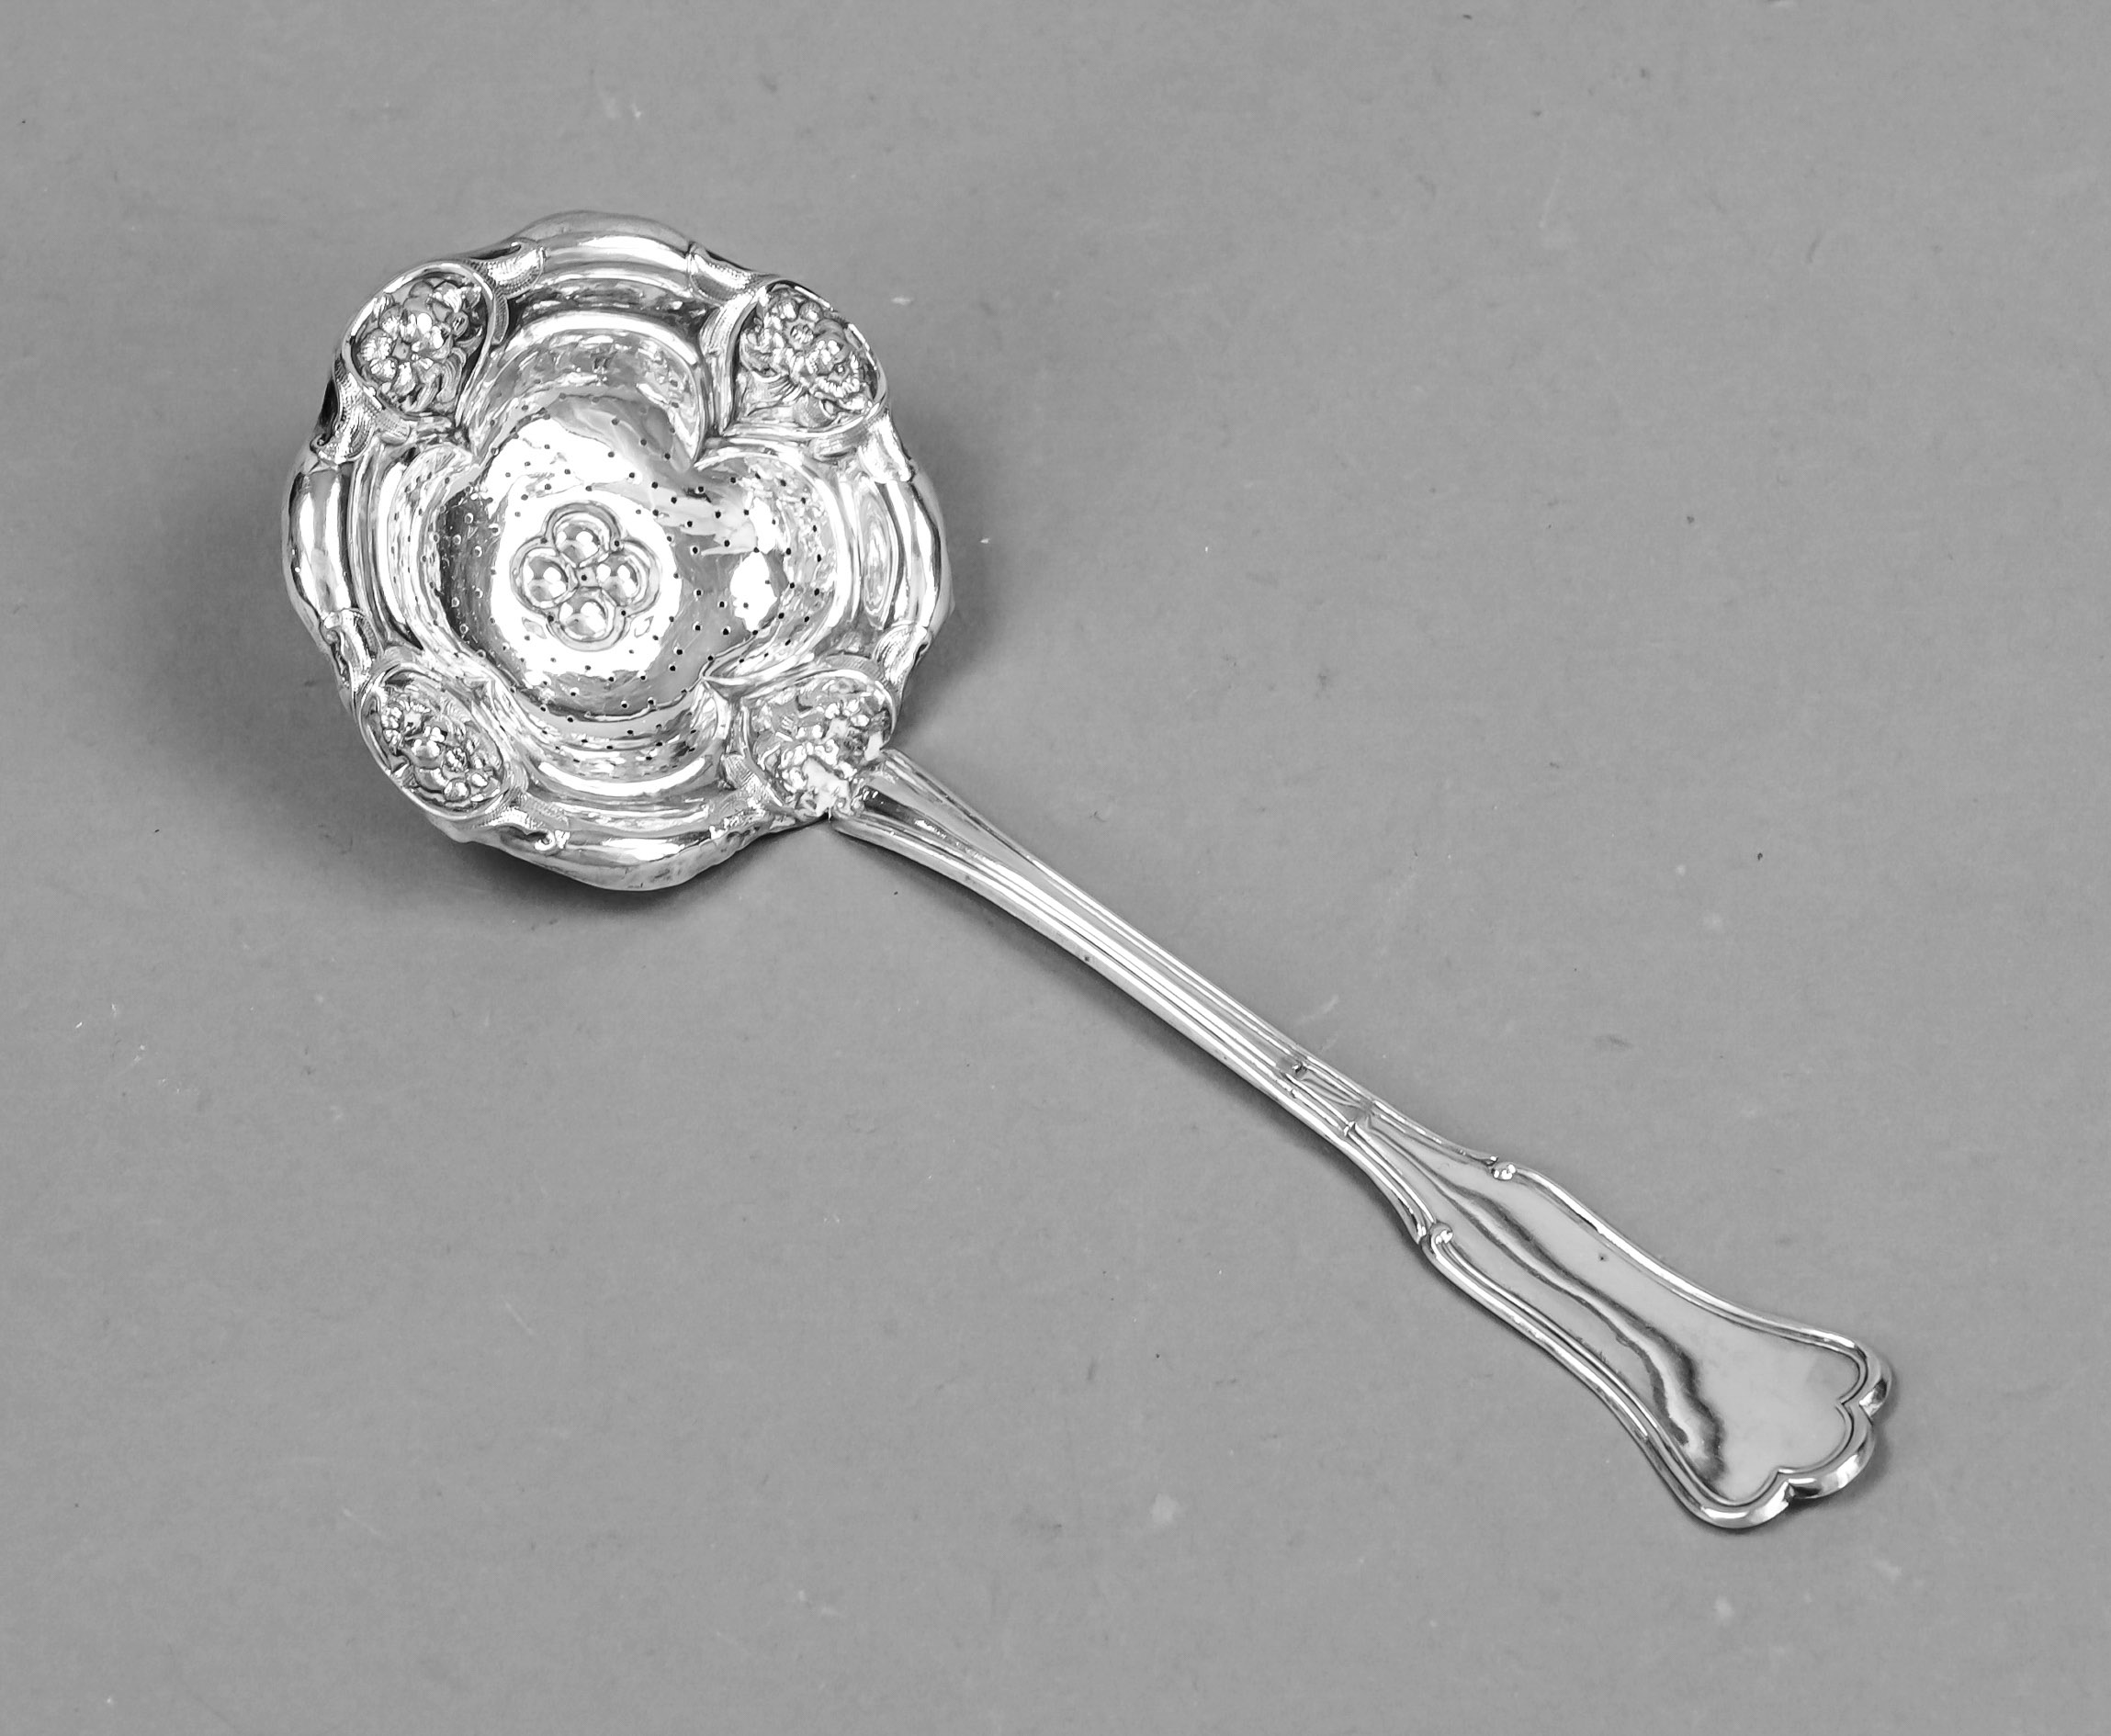 Tea strainer with handle, late 19th century, probably under-alloyed silver, flower form, floral